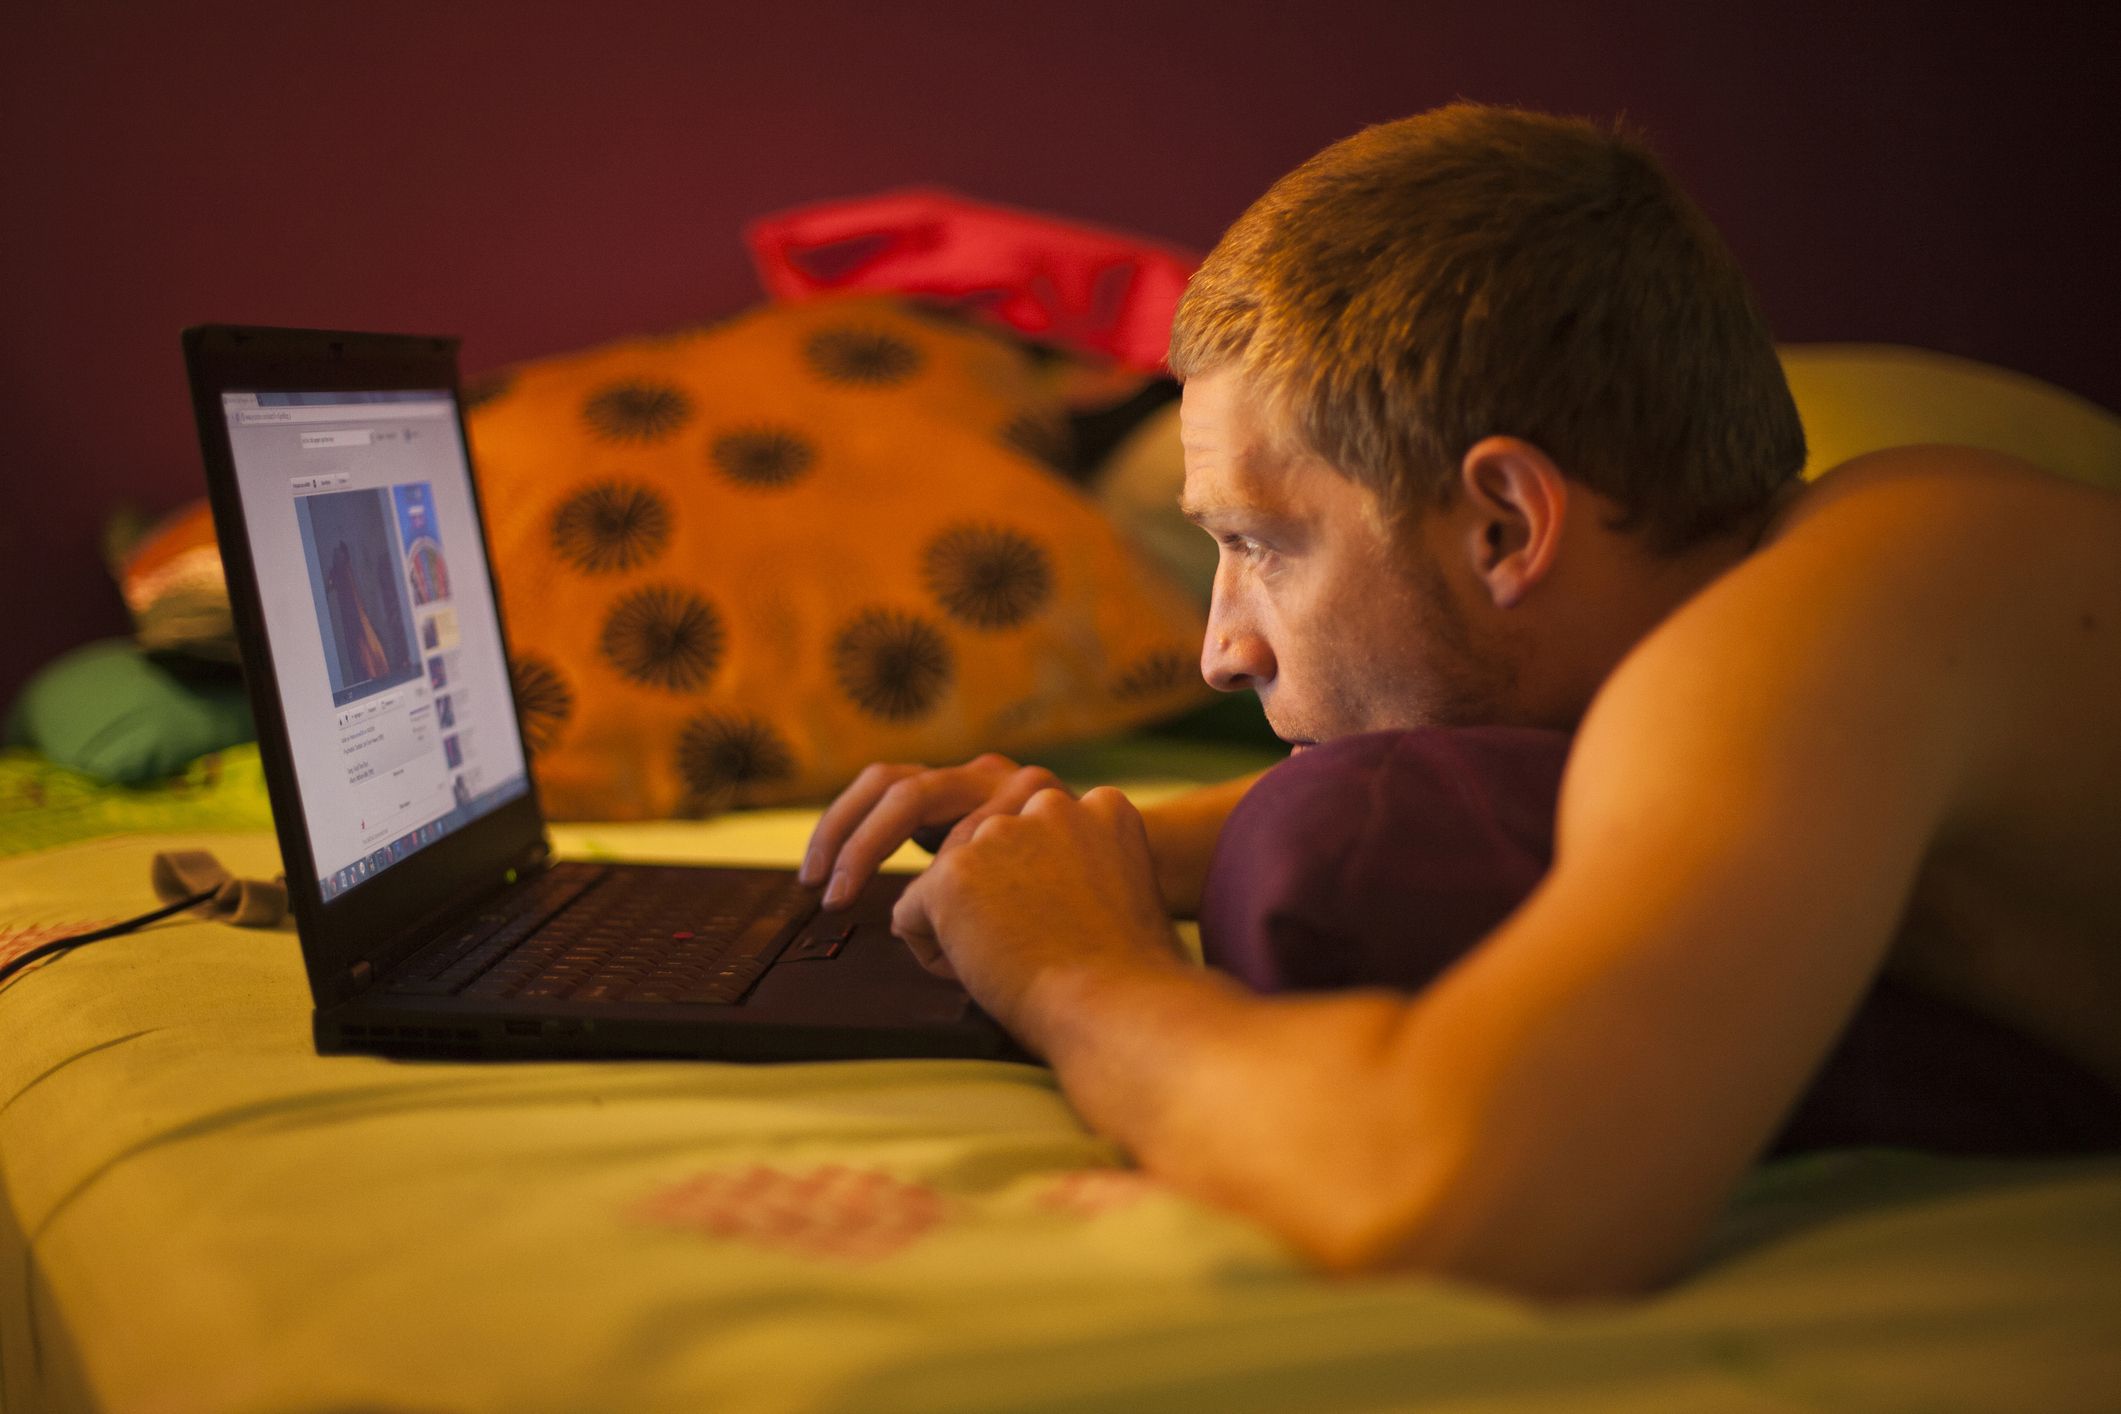 6 Easy Ways to Stop Watching Porn, According to Sex Experts pic